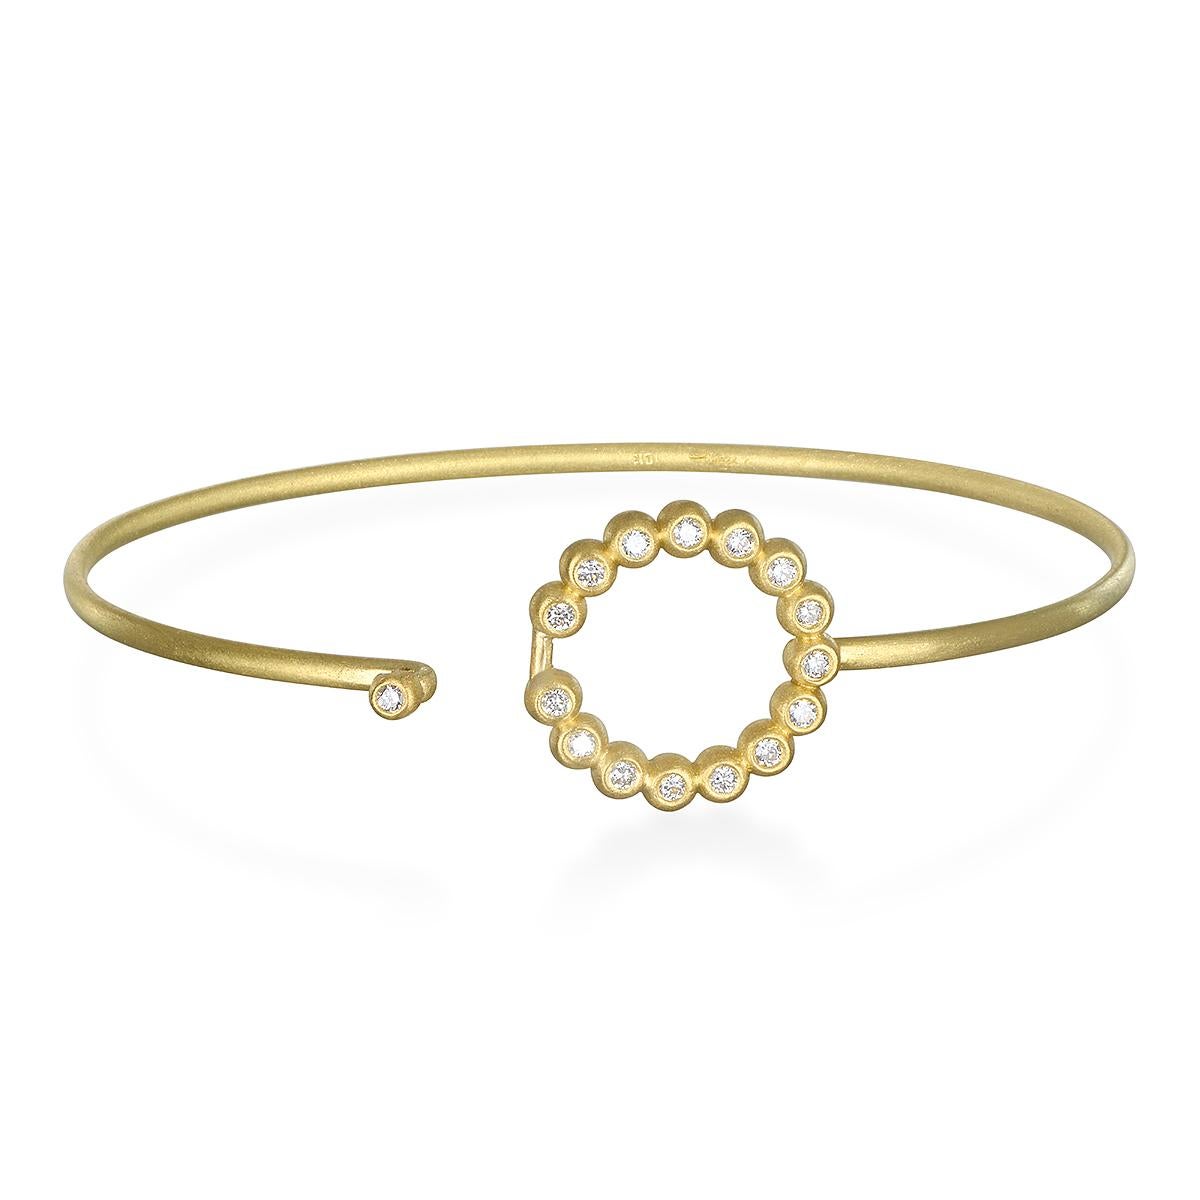 Understated beauty! Faye Kim's handcrafted in 18k gold, the Round diamond motif doubles as the clasp. Perfect to wear on its own or great to stack with other bangles.

Bangle Dimensions: LxW 2.5